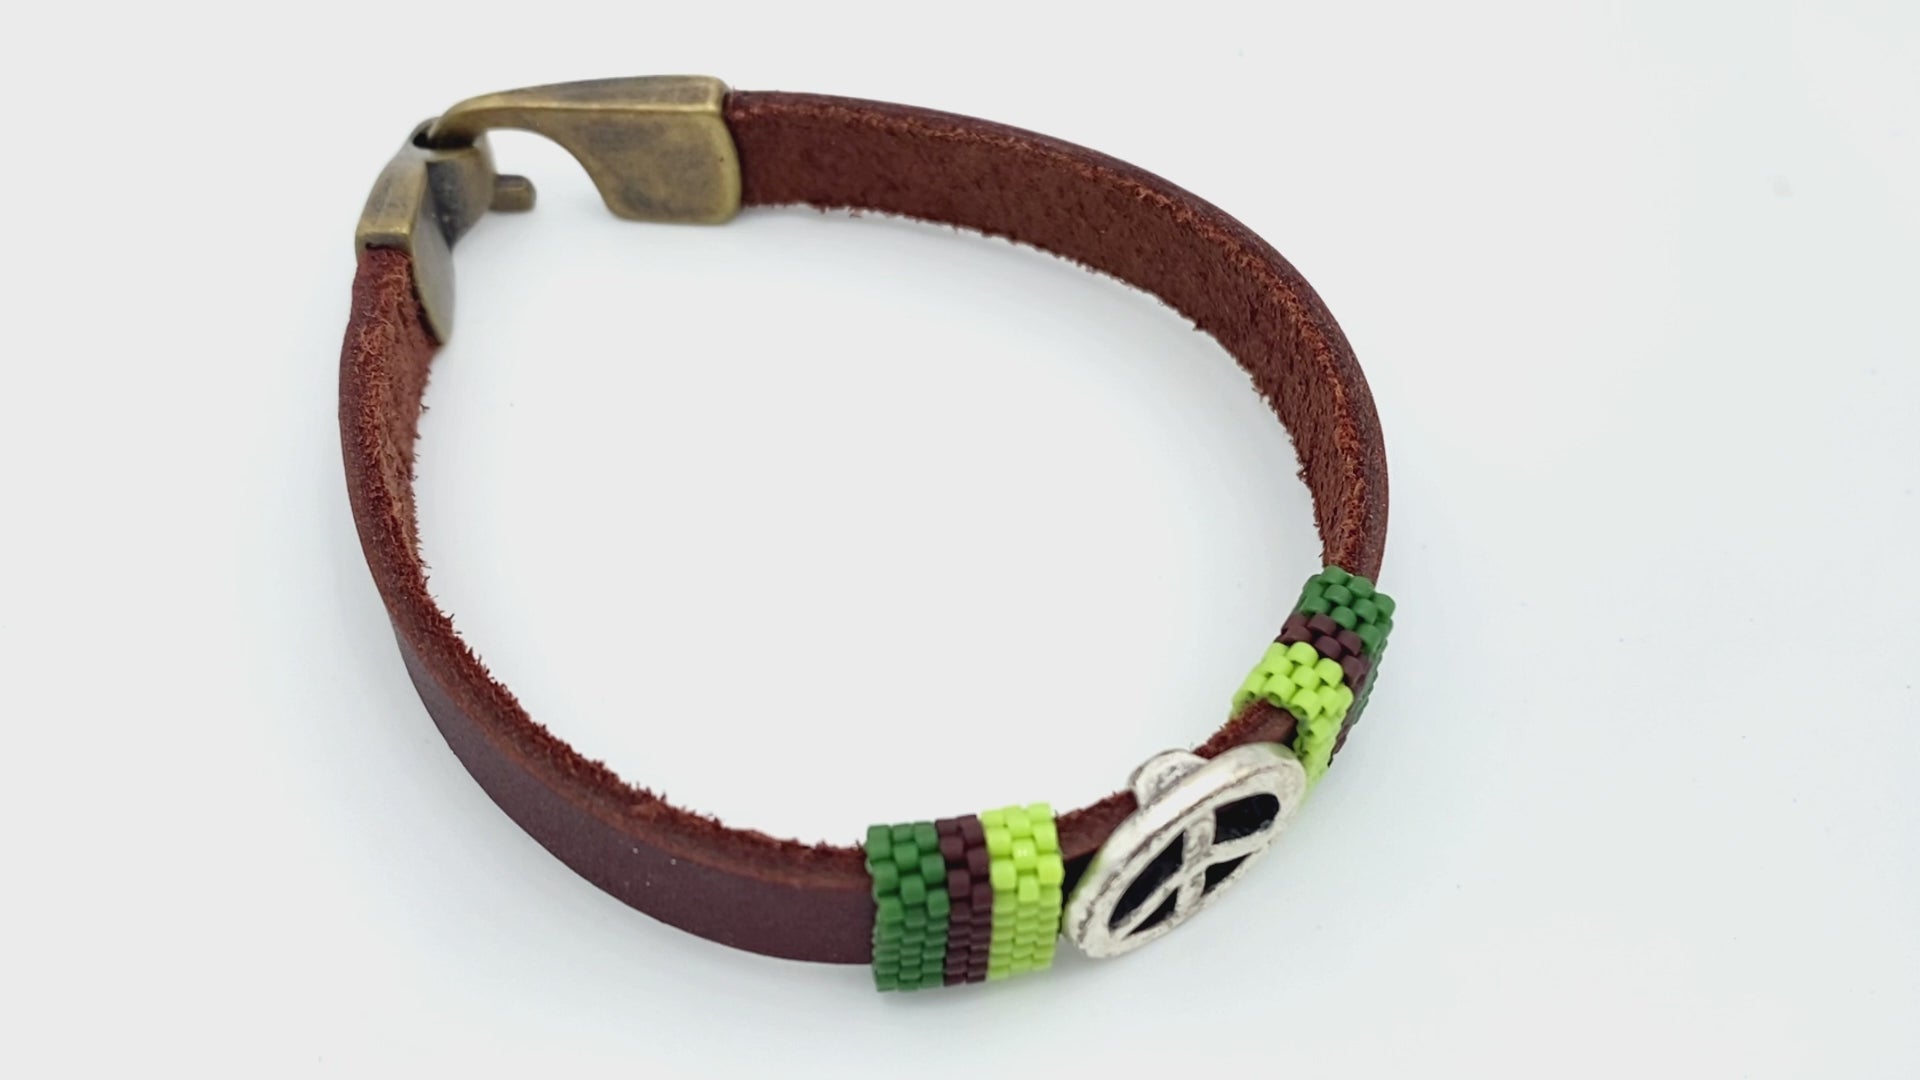 Handmade leather men's bracelet decorated with beaded inlays and peace sign sliding bead - Ornamentico shop